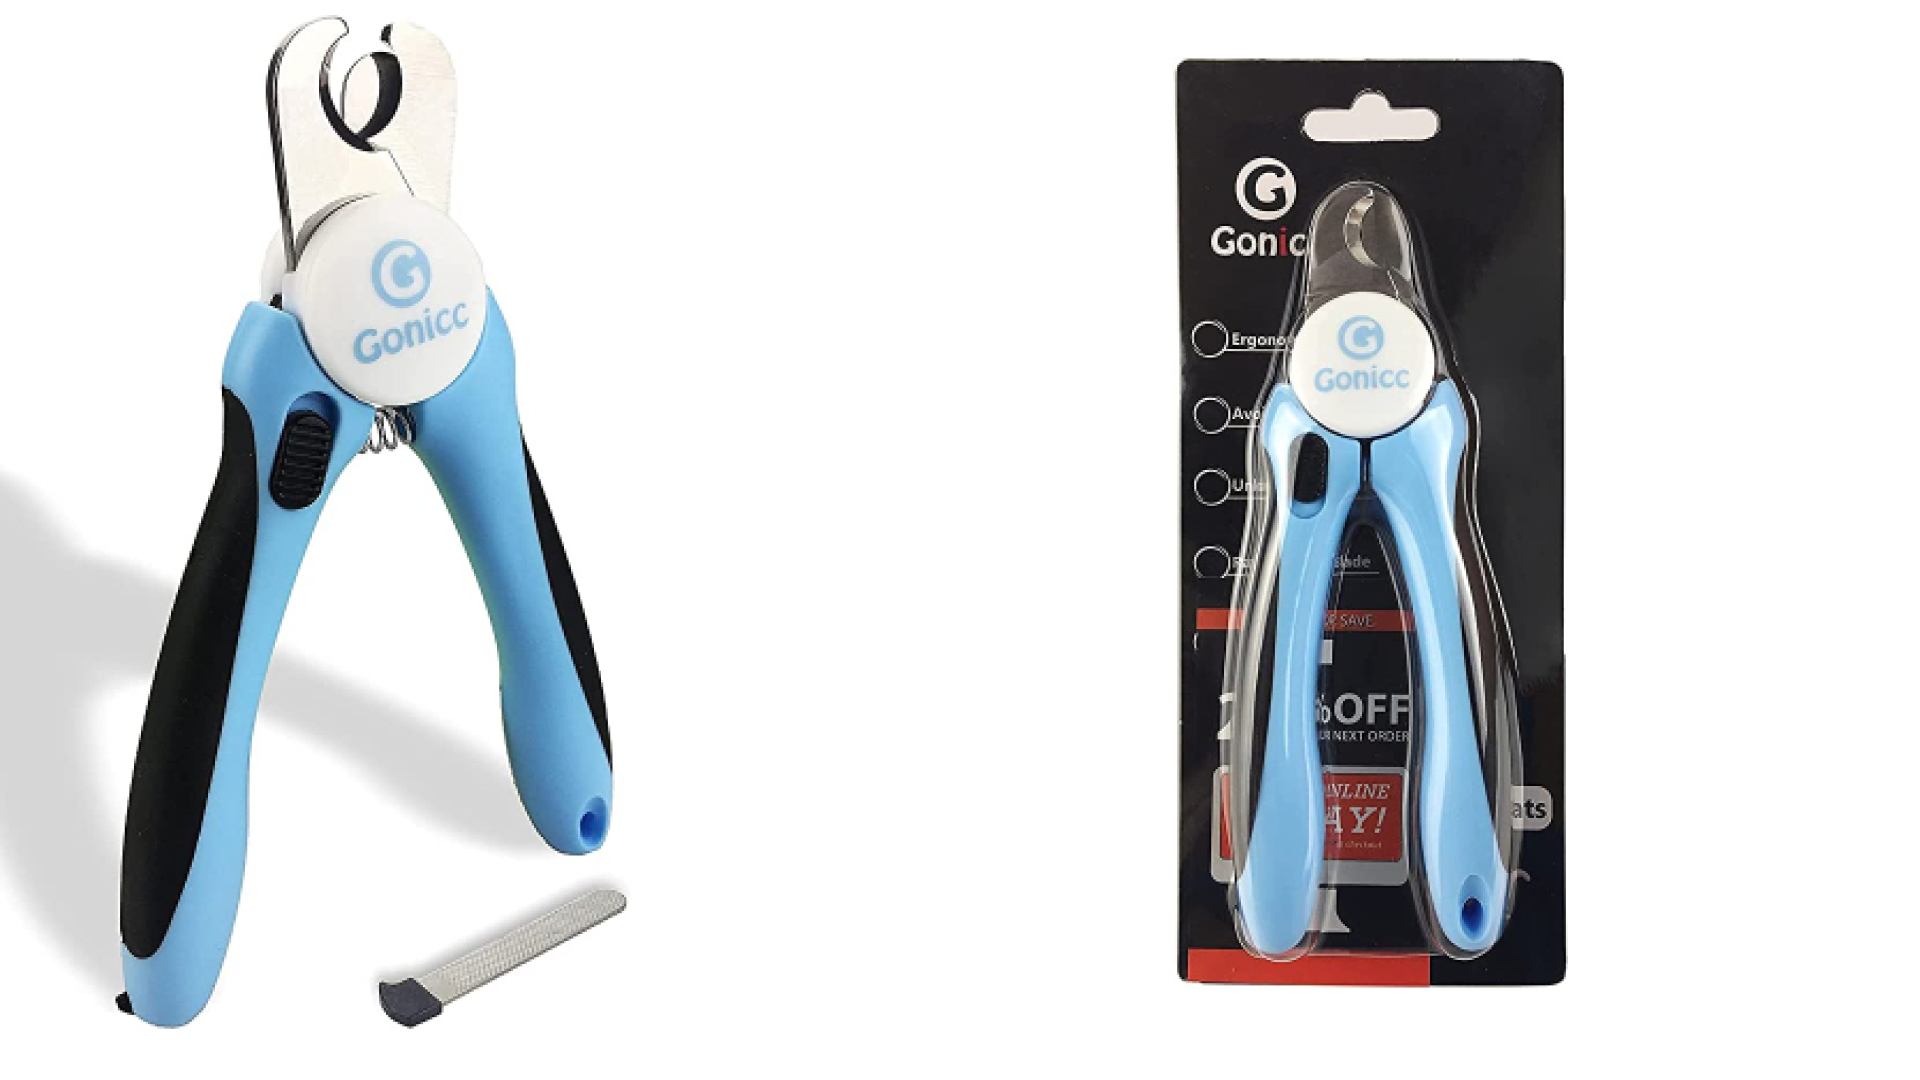 Gonicc Dog & Cat Pets Nail Clippers and Trimmers - with Safety Guard | eBay